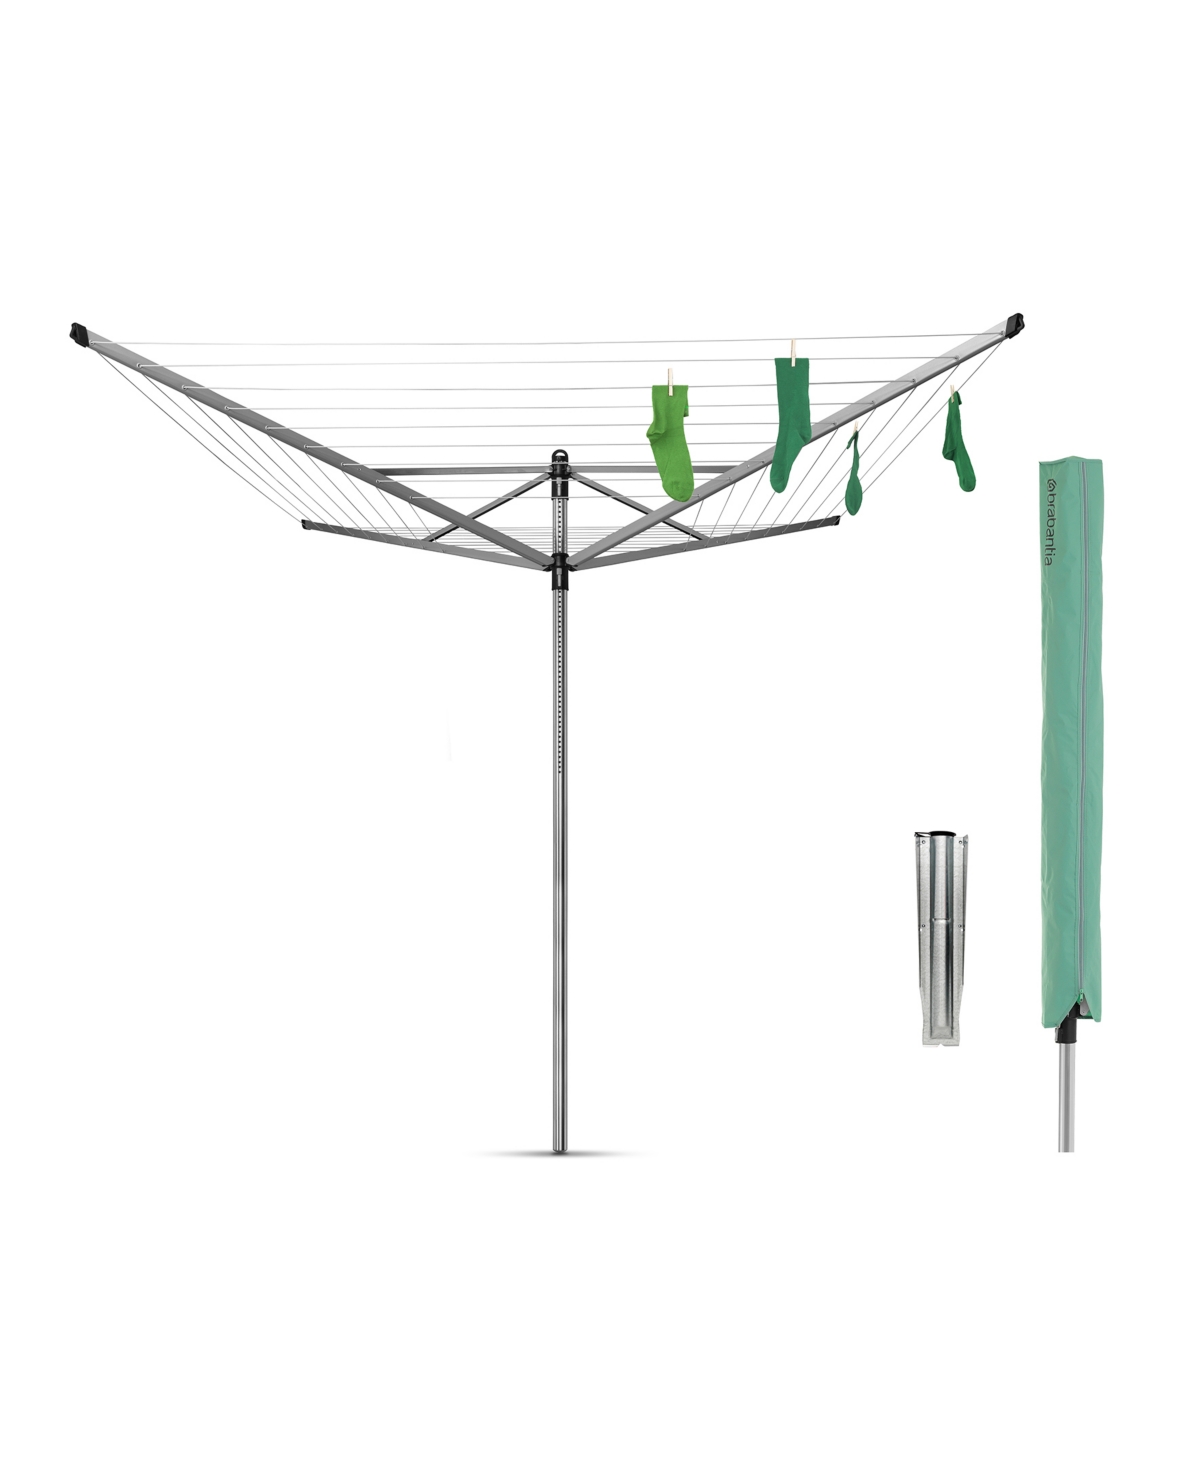 Rotary Lift-o-Matic Clothesline - 197', 60 Meter with Metal Ground Spike and Protective Cover Set - Metallic Gray